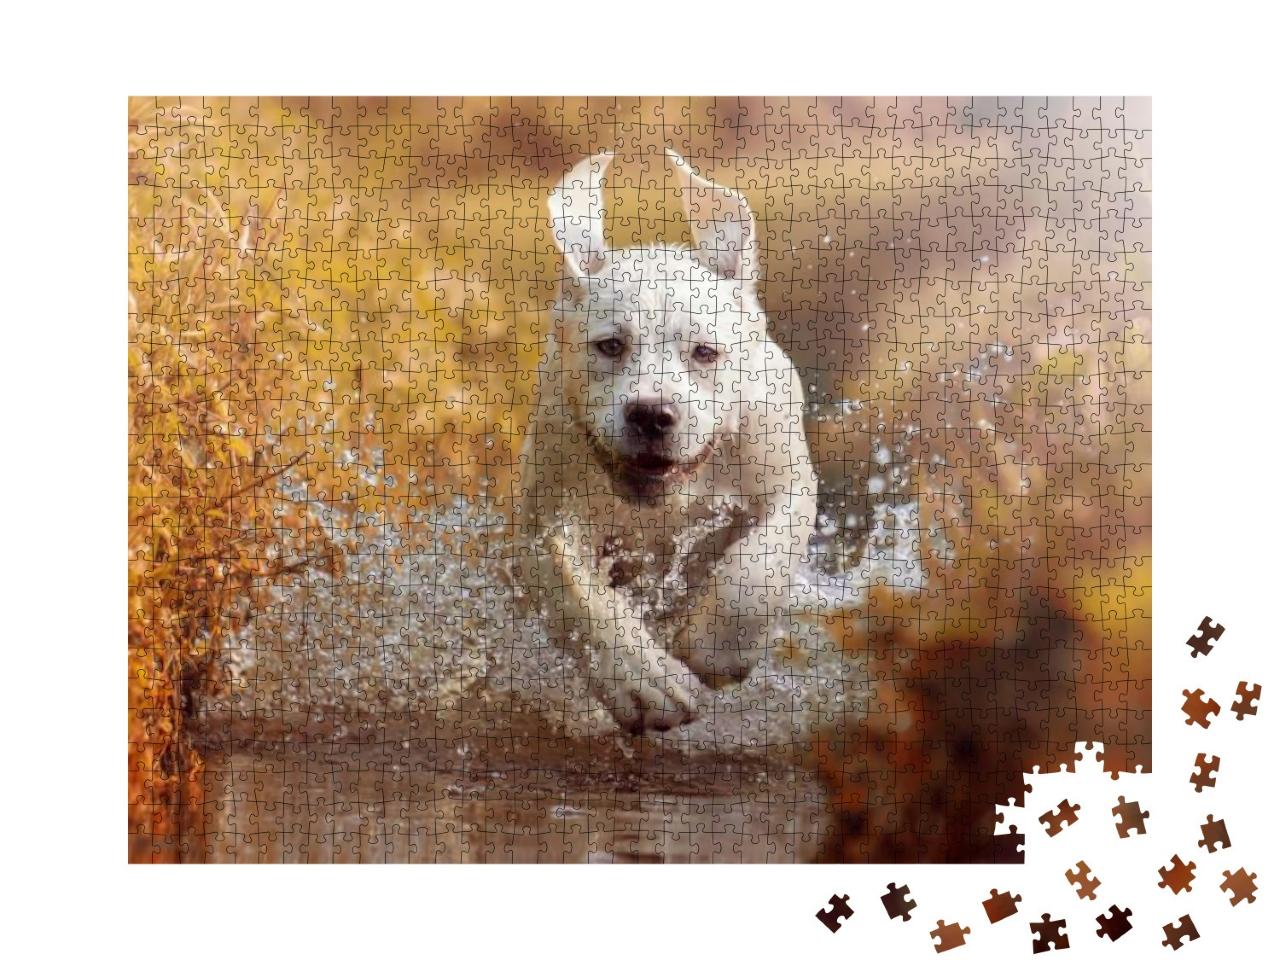 A Young Labrador Retriever Dog is Running Through a River... Jigsaw Puzzle with 1000 pieces